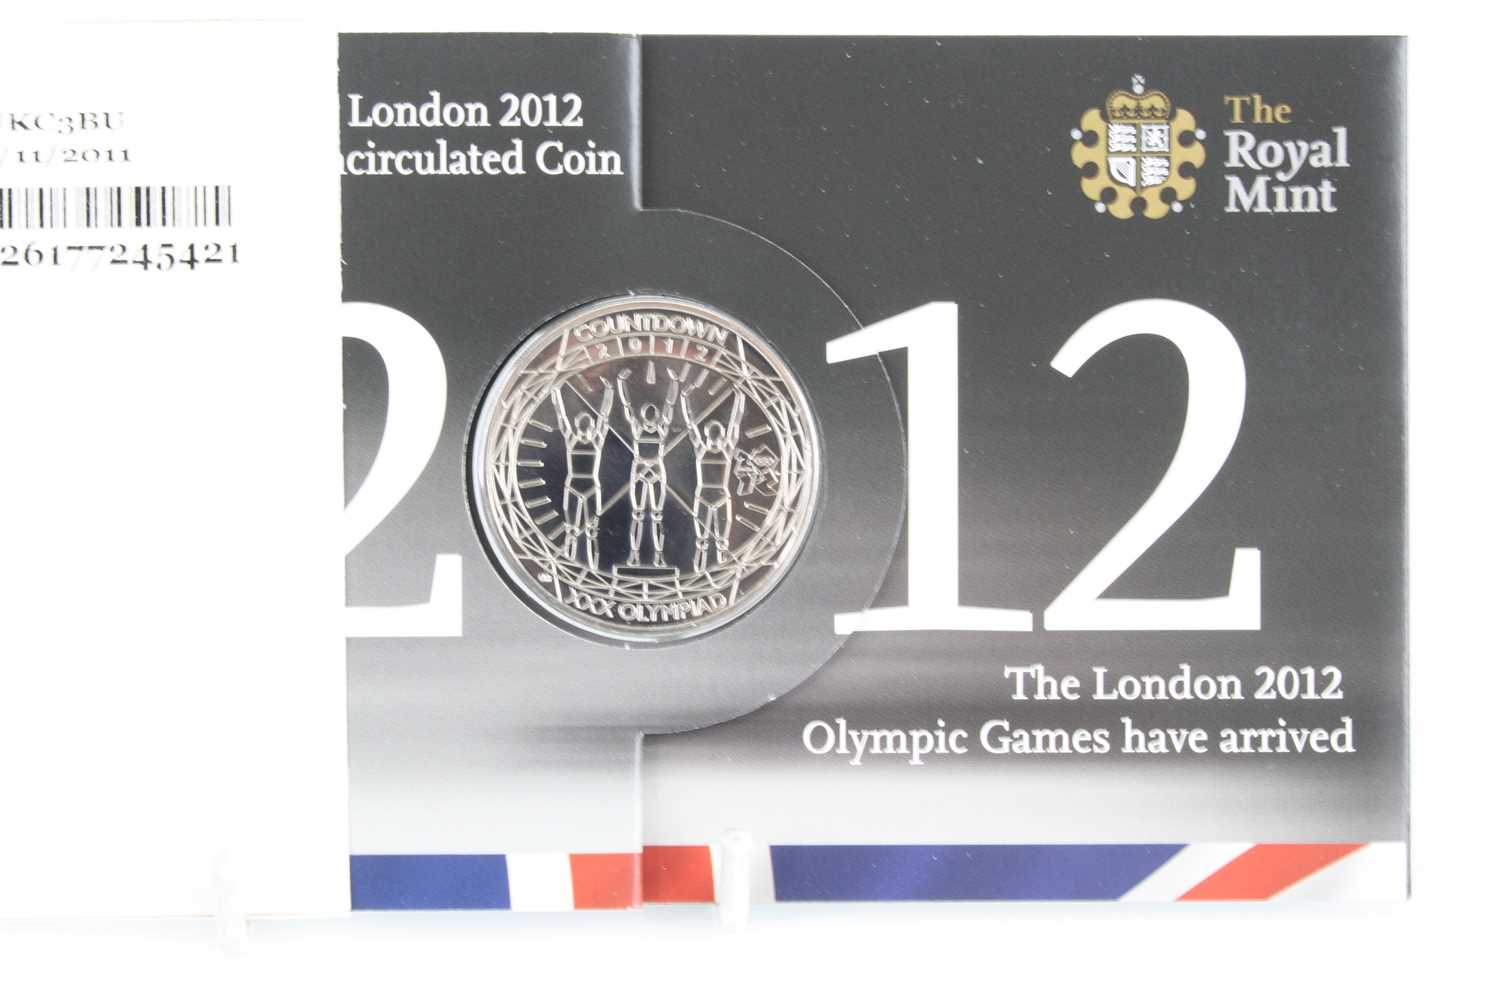 United Kingdom, The Royal Mint, Countdown To London 2012 £5 Brilliant Uncirculated Coins, The - Image 2 of 2